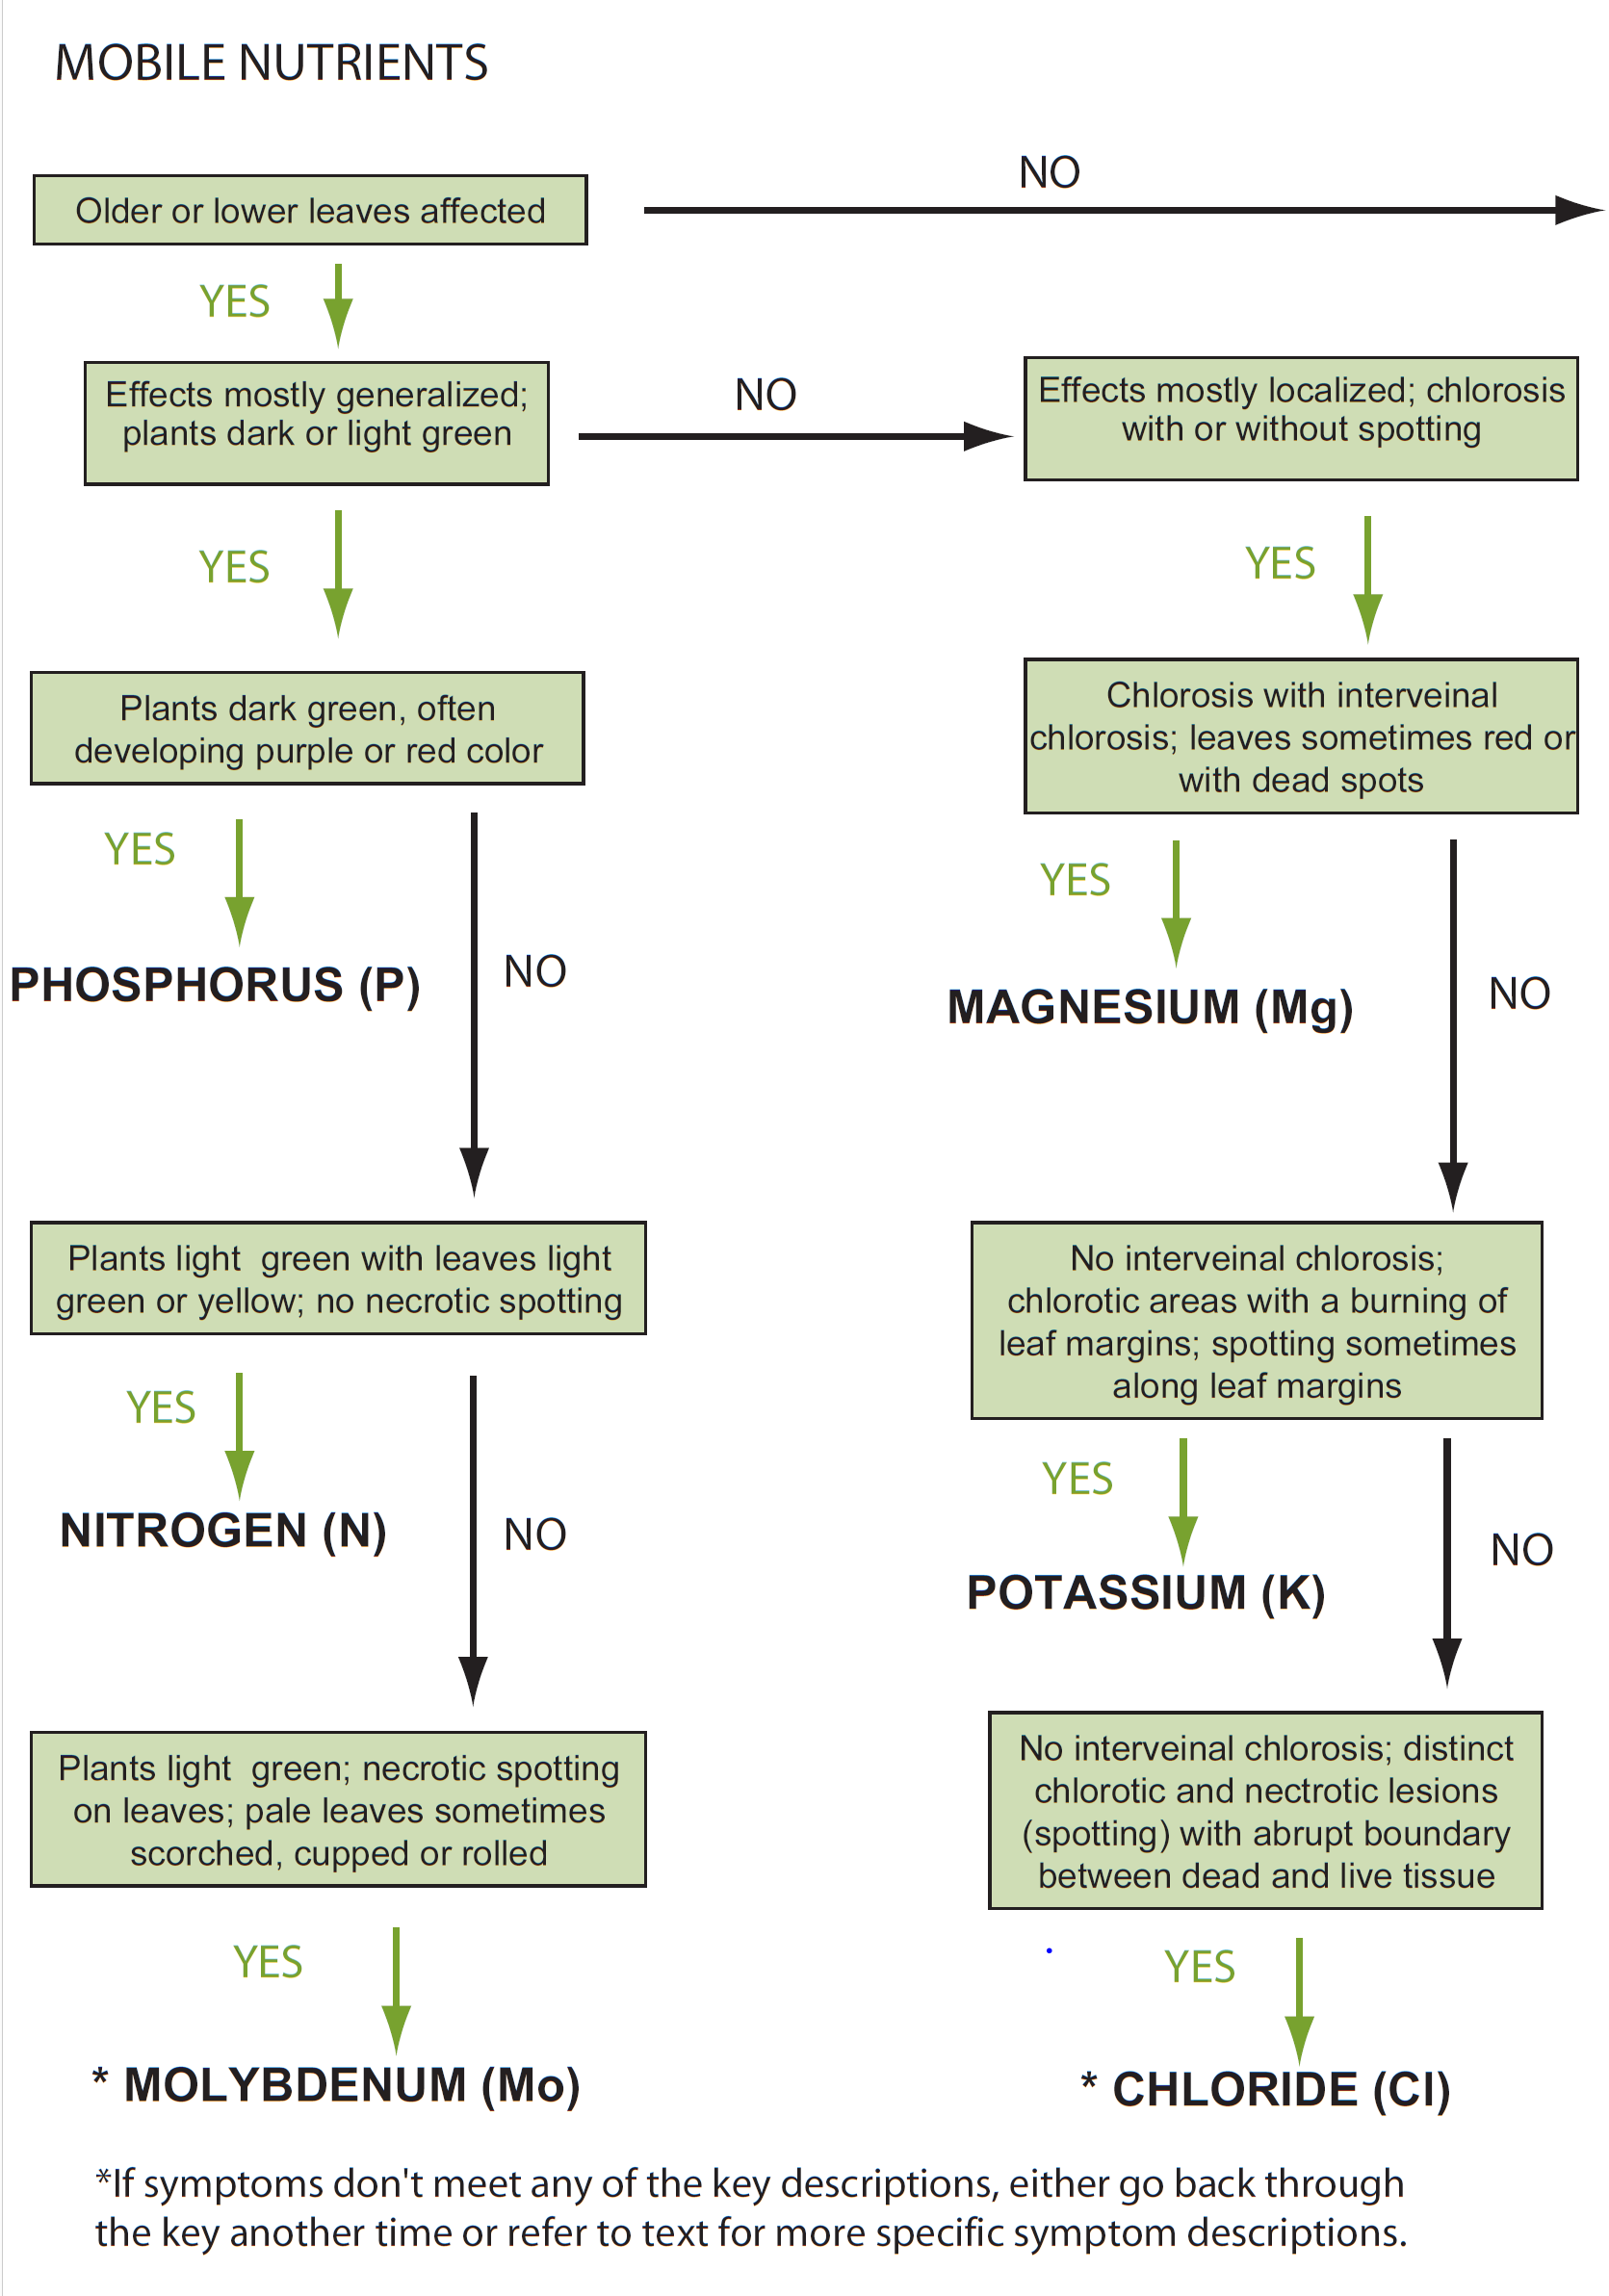 A flow chart lays out the diagnostic criteria for mobile nutrients